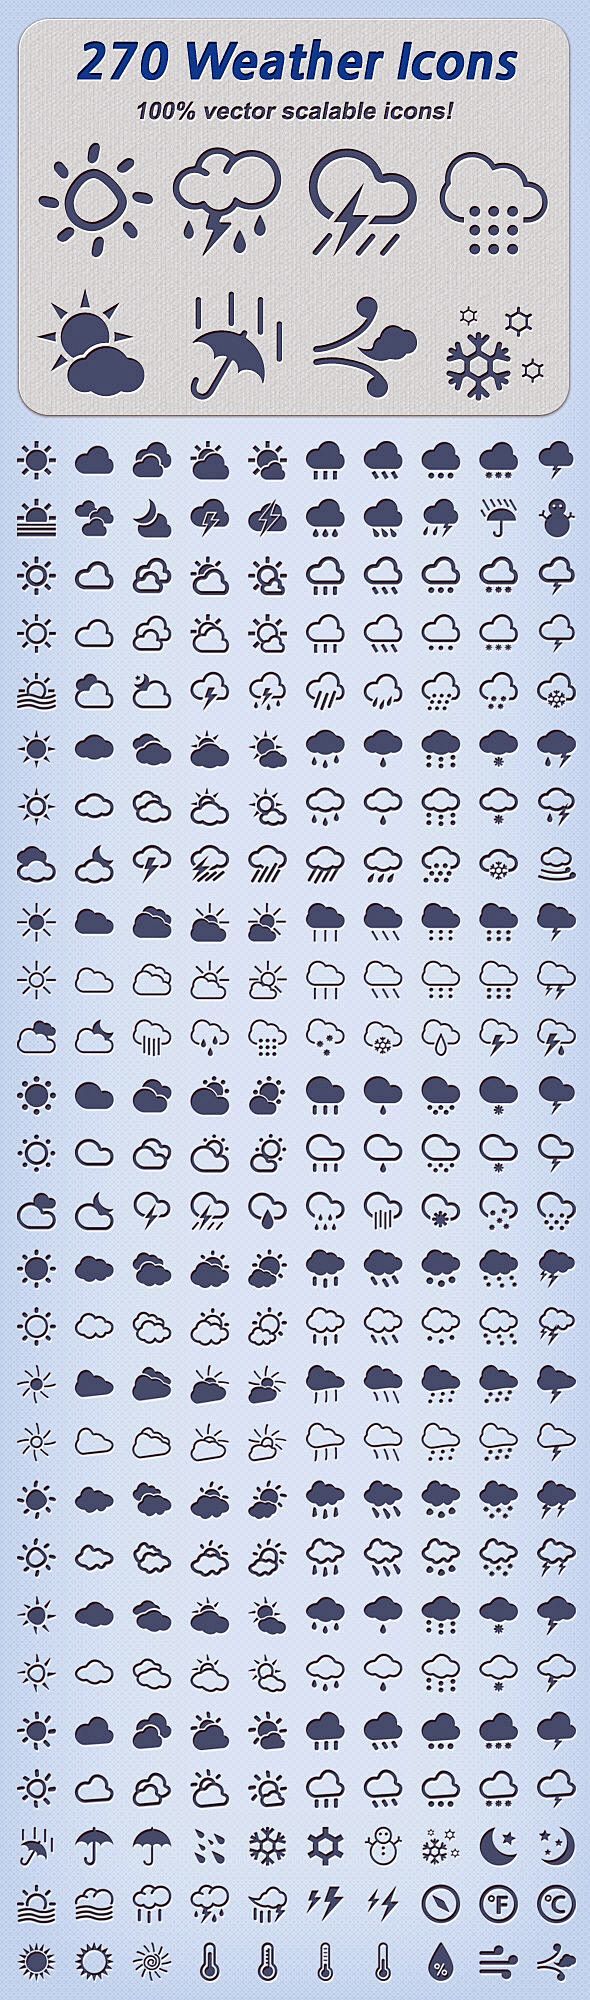 270 Weather Icons by...